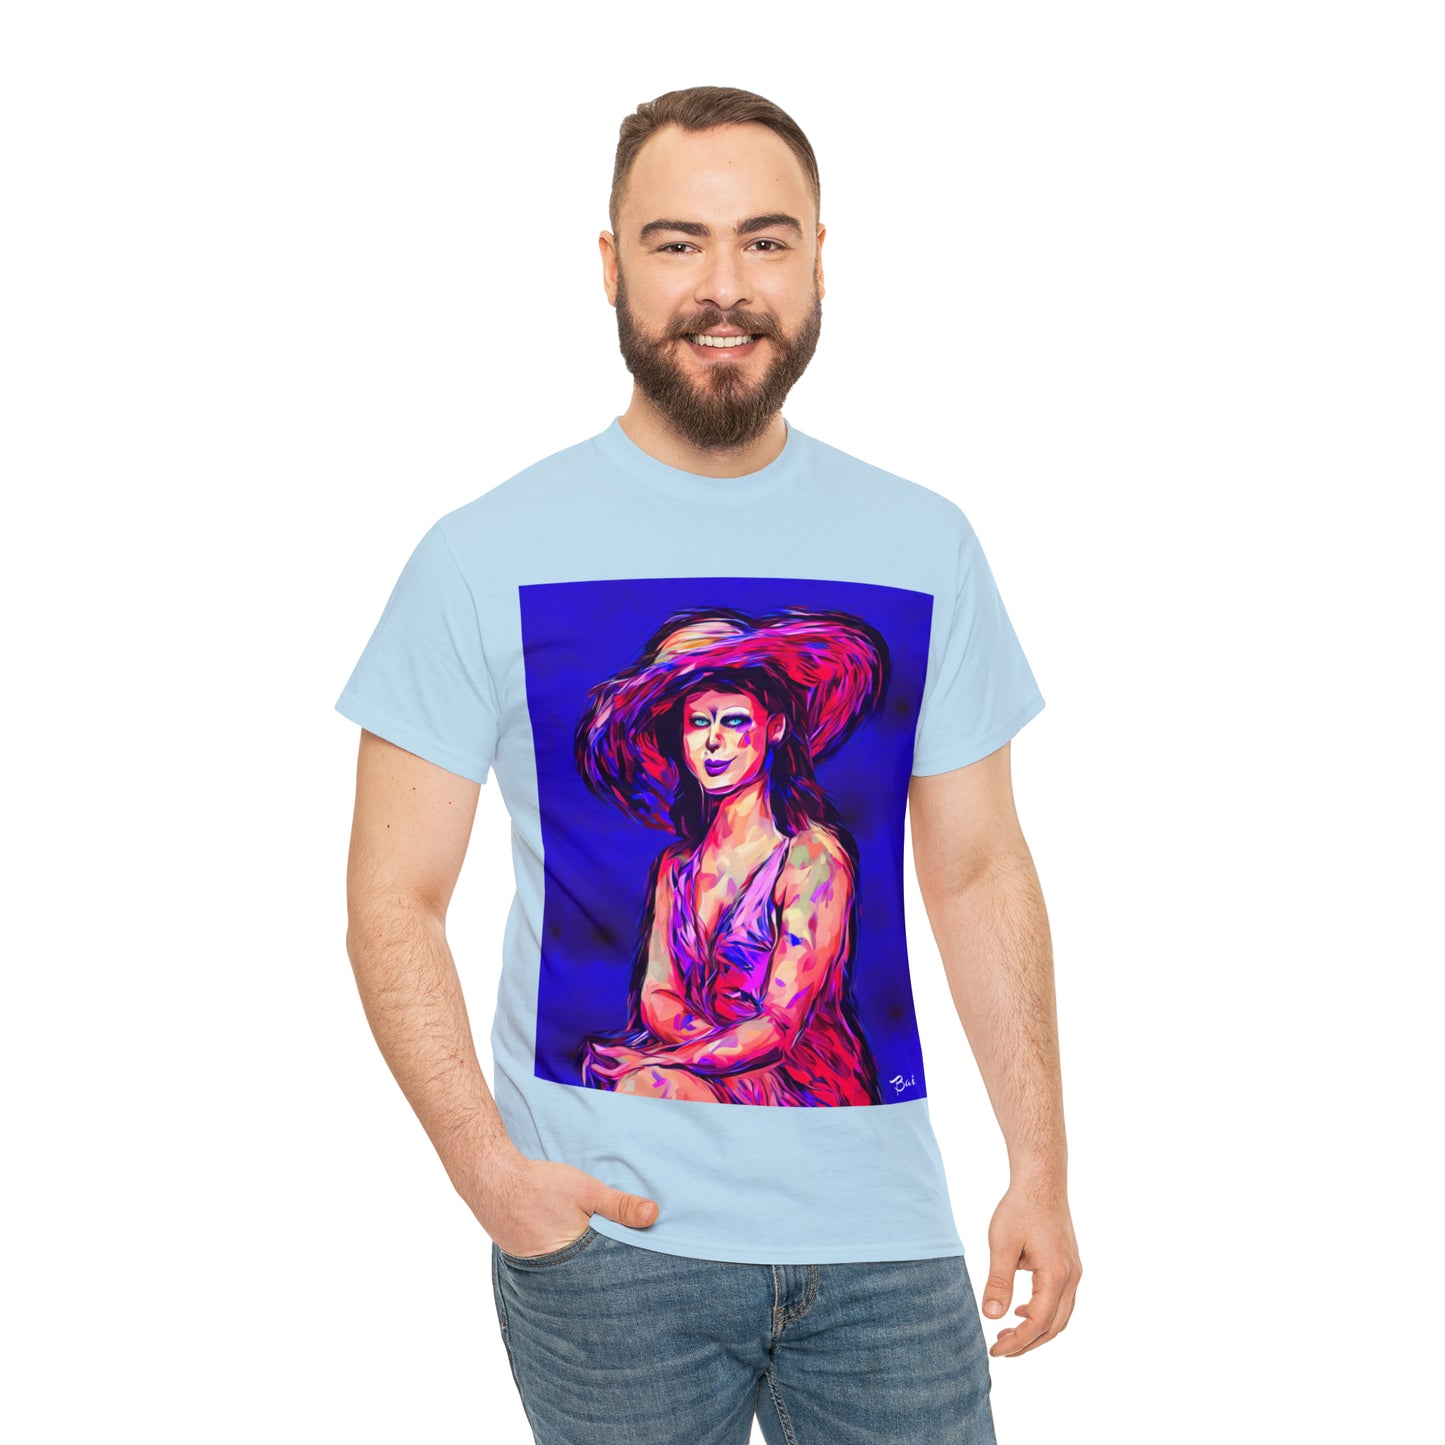 LADY IN SUN HAT - Airt on a Shirt  - Unisex Heavy Cotton Tee - AUS